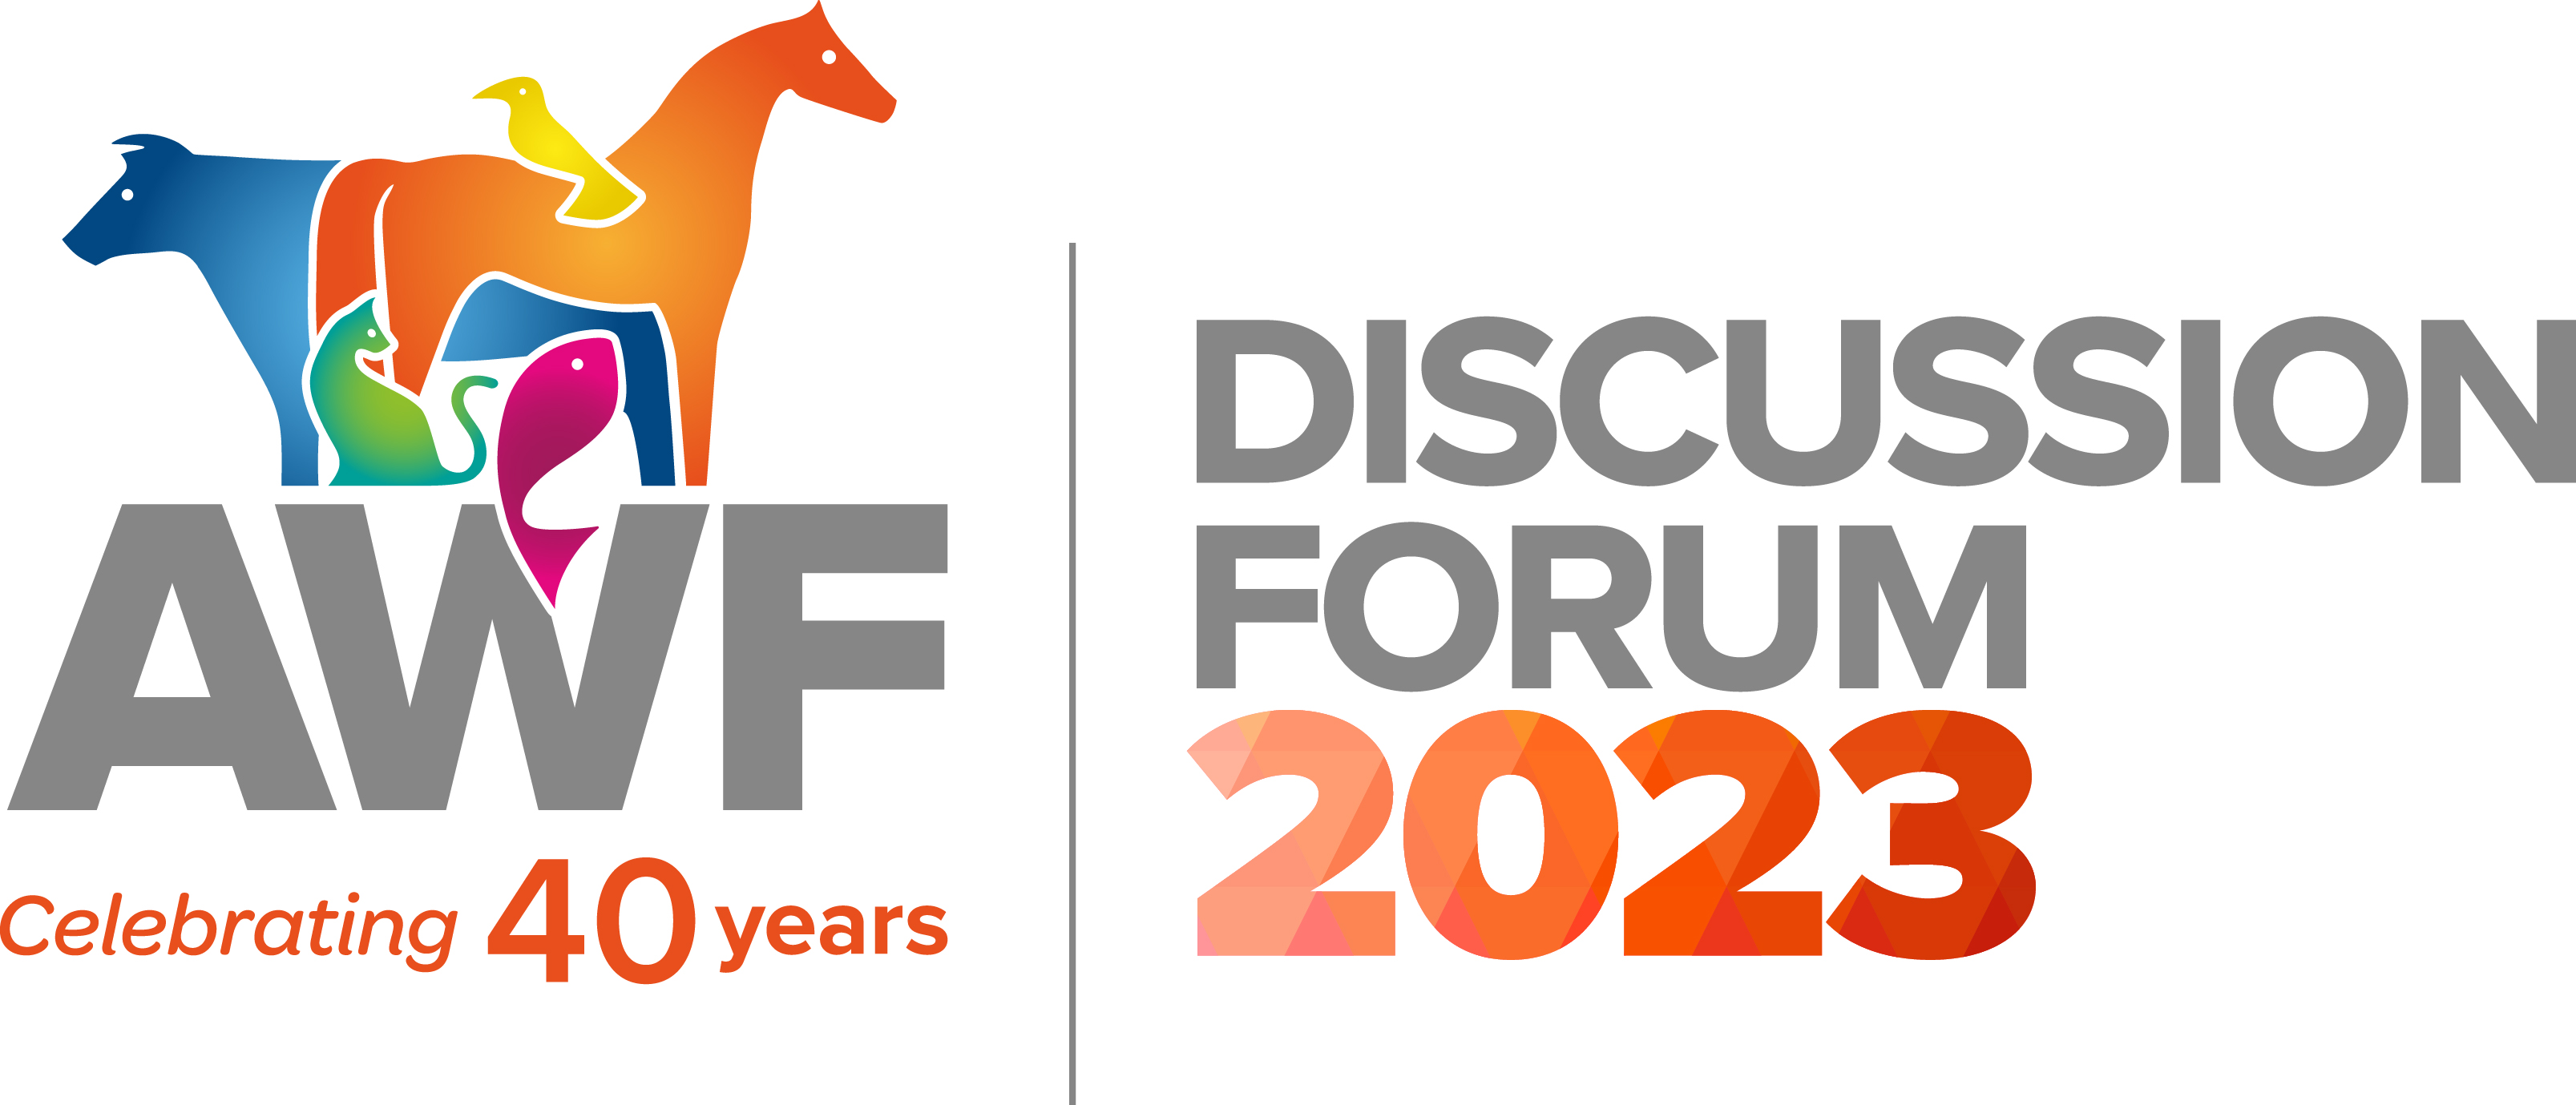 Join the Animal Welfare Foundation's annual Discussion Forum as the charity  celebrates 40 years